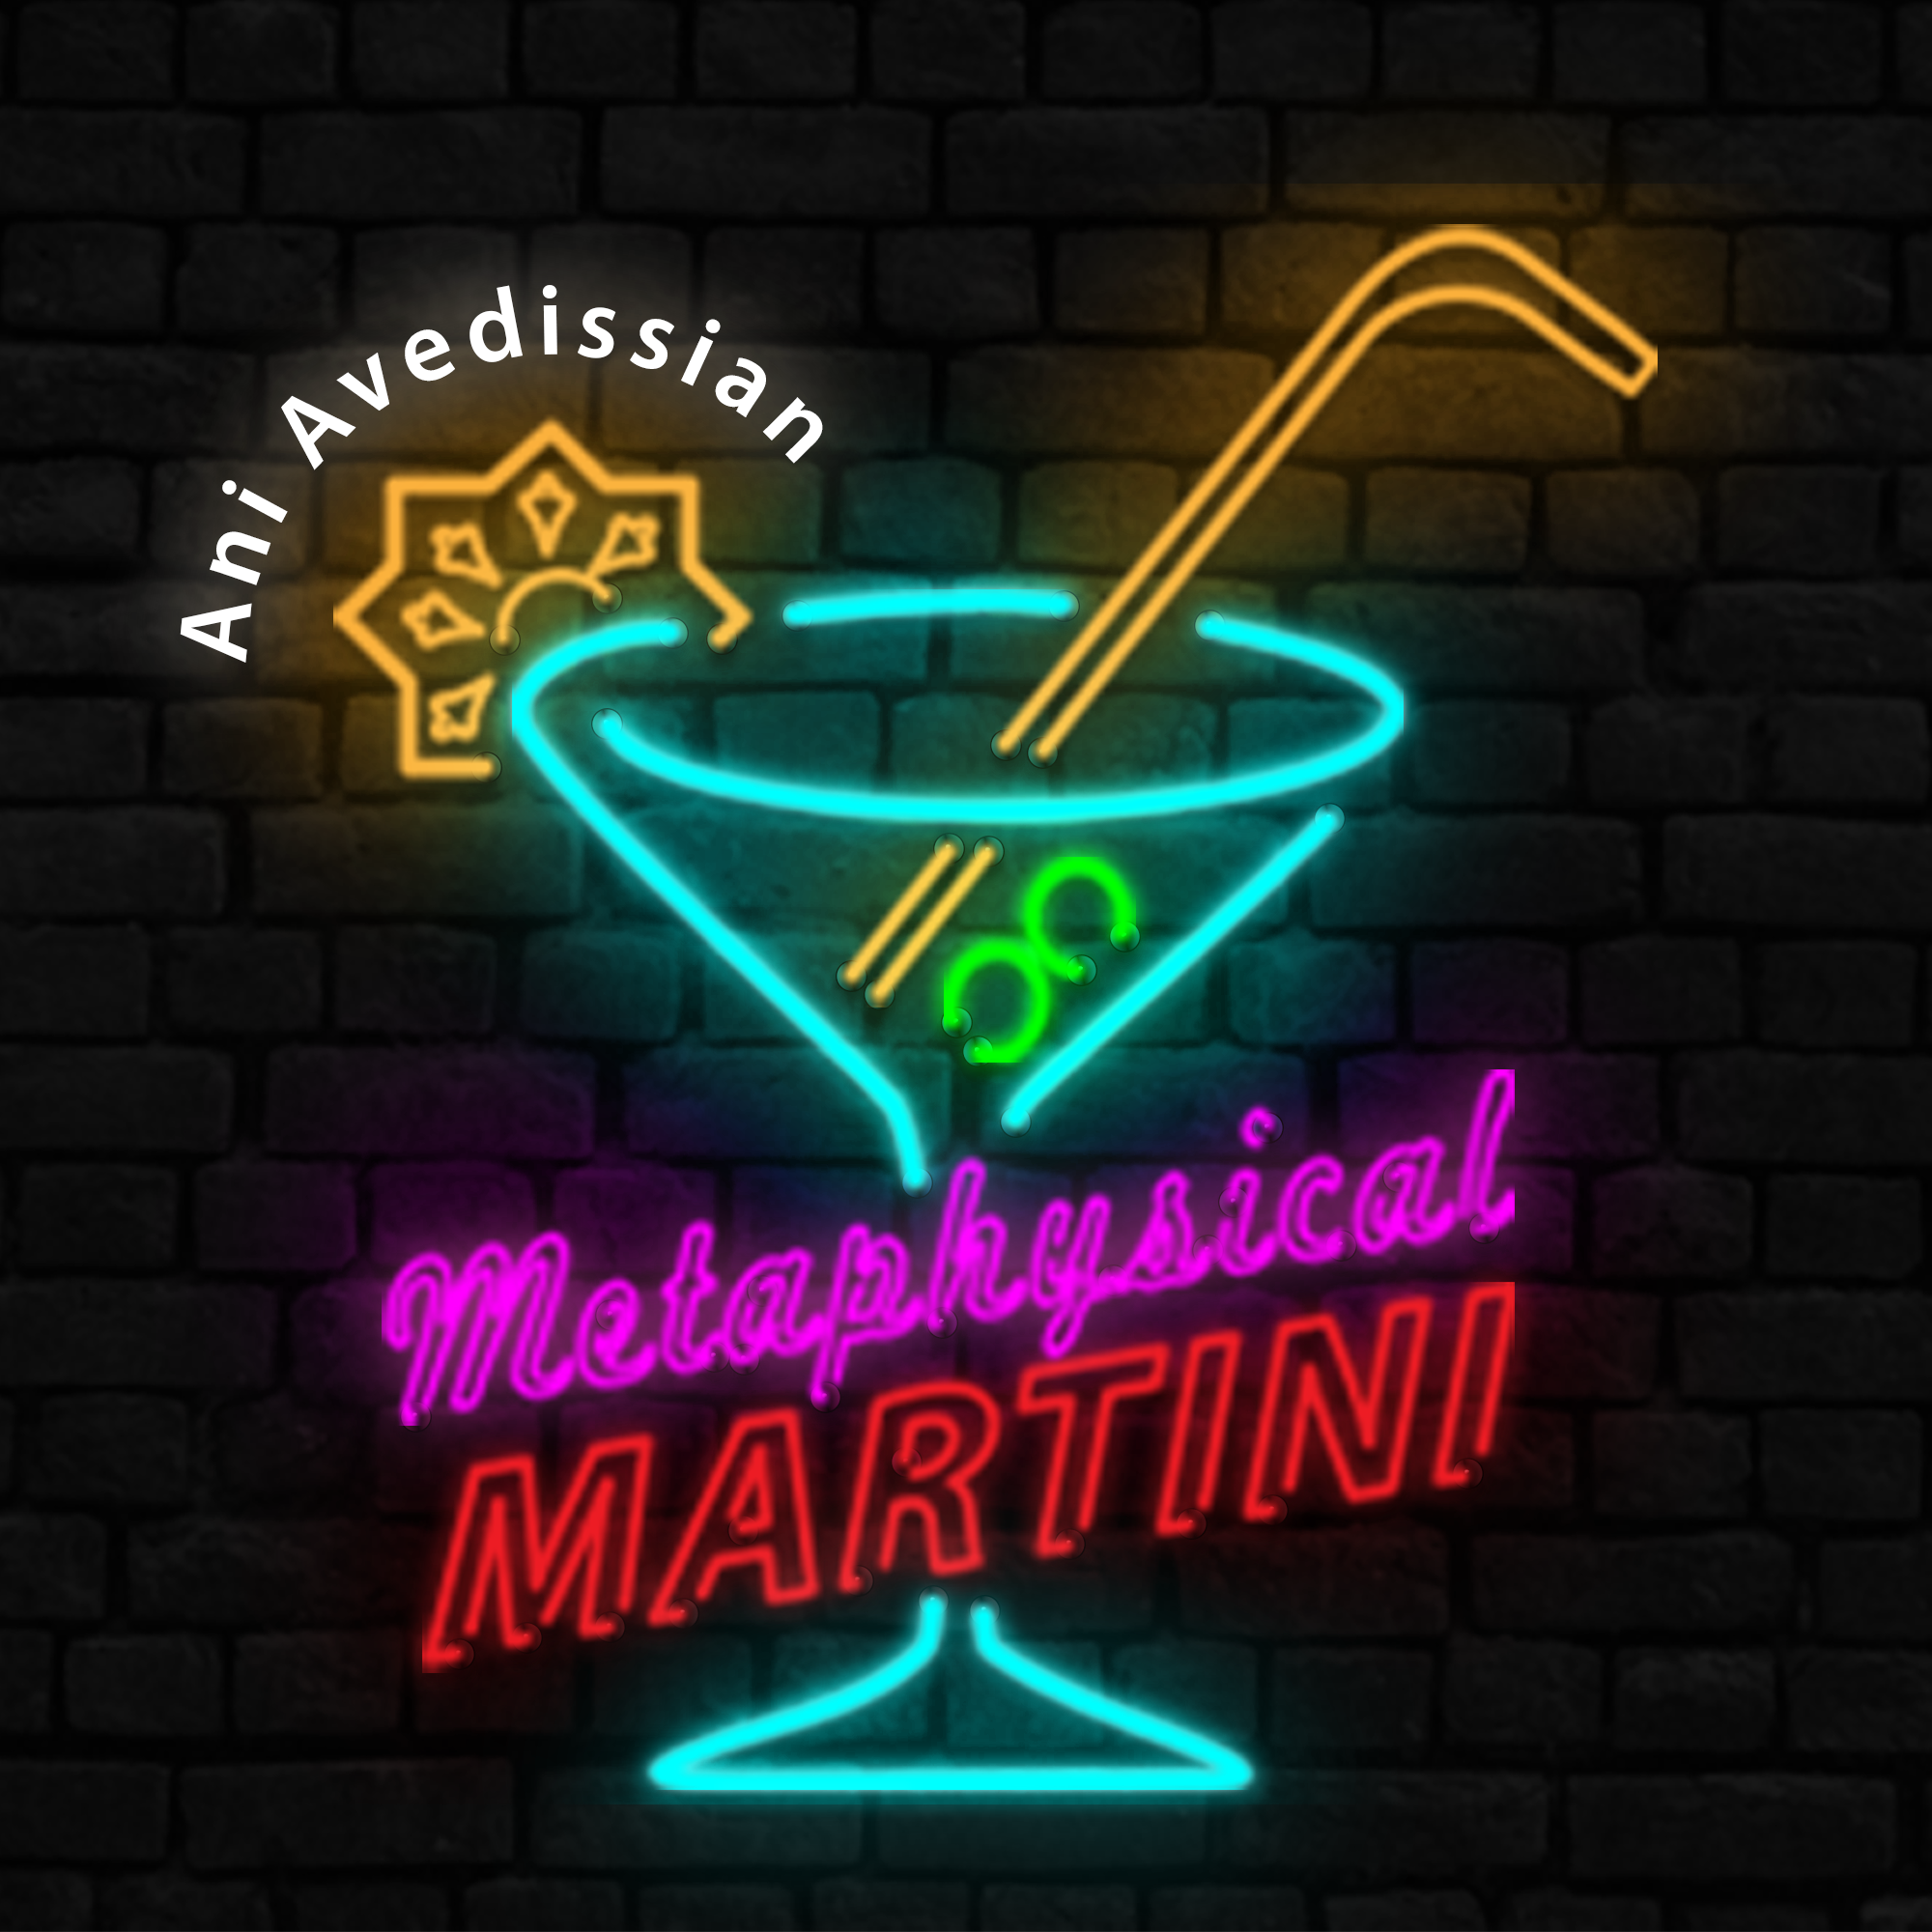 "Metaphysical Martini"   02/05/2020  Magic marmalade,  serenade, foreign aid and more!